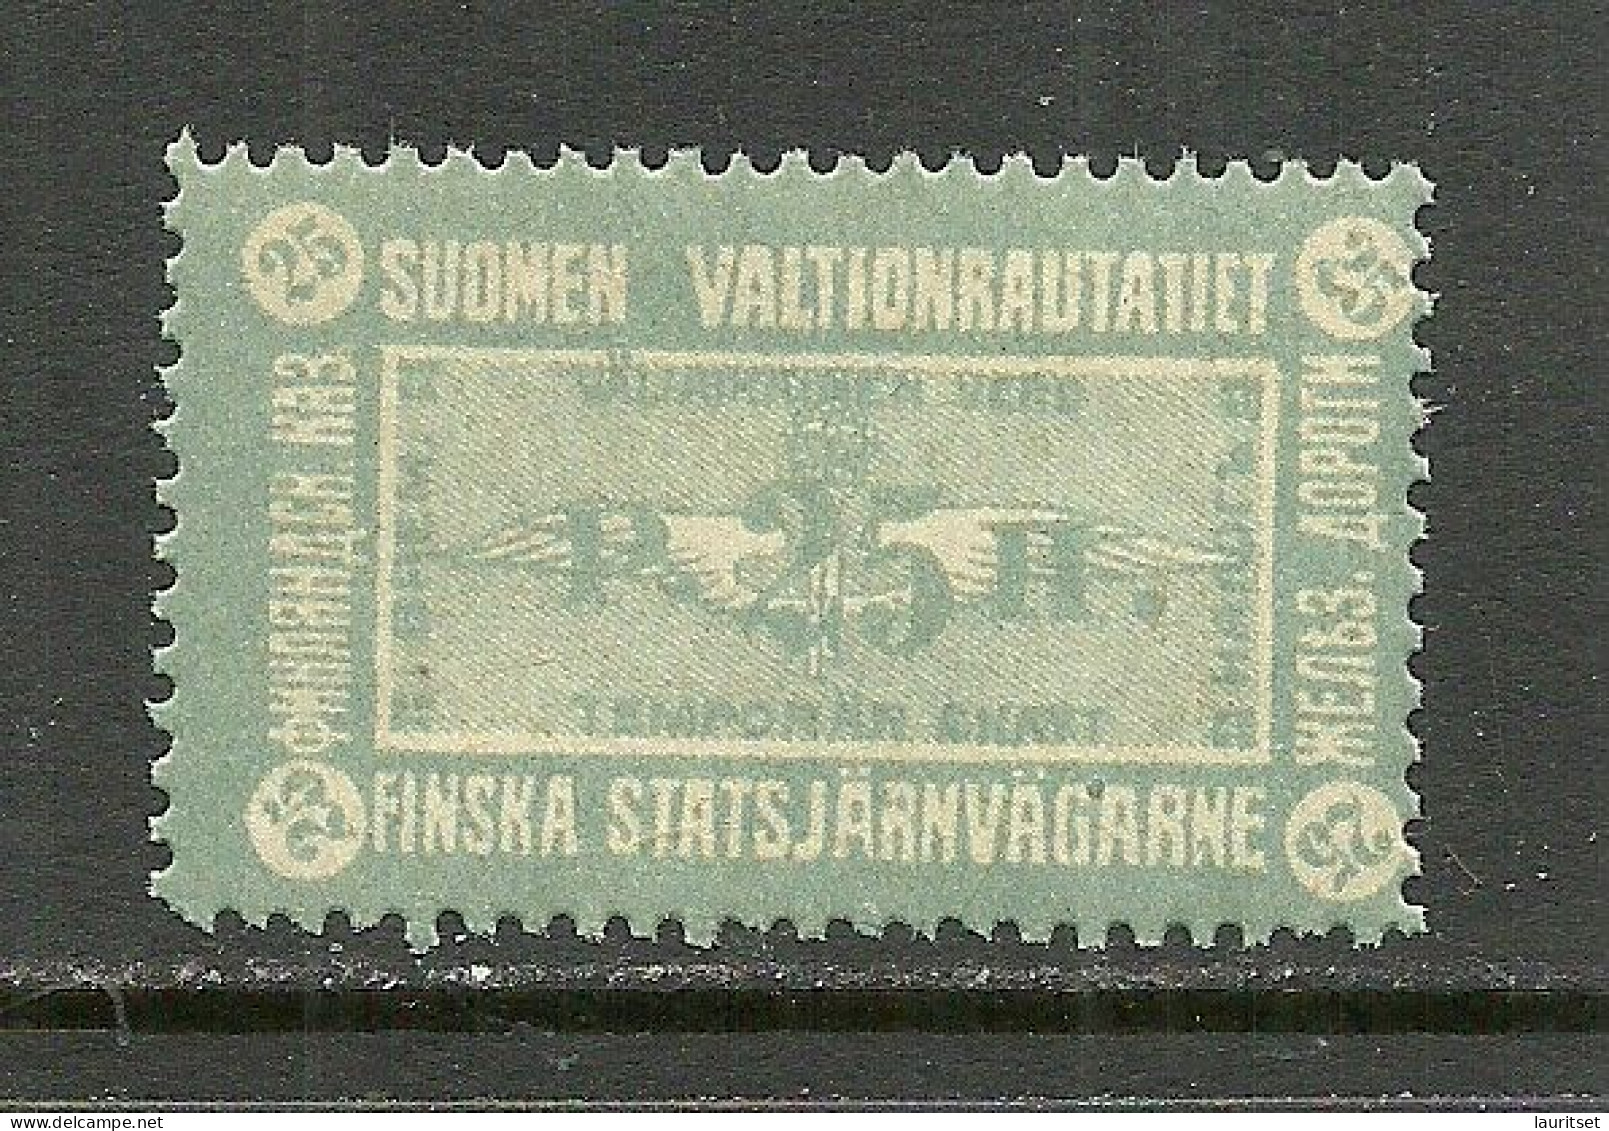 FINLAND FINNLAND 1915 Railway Stamp State Railway 25 P. MNH - Paquetes Postales